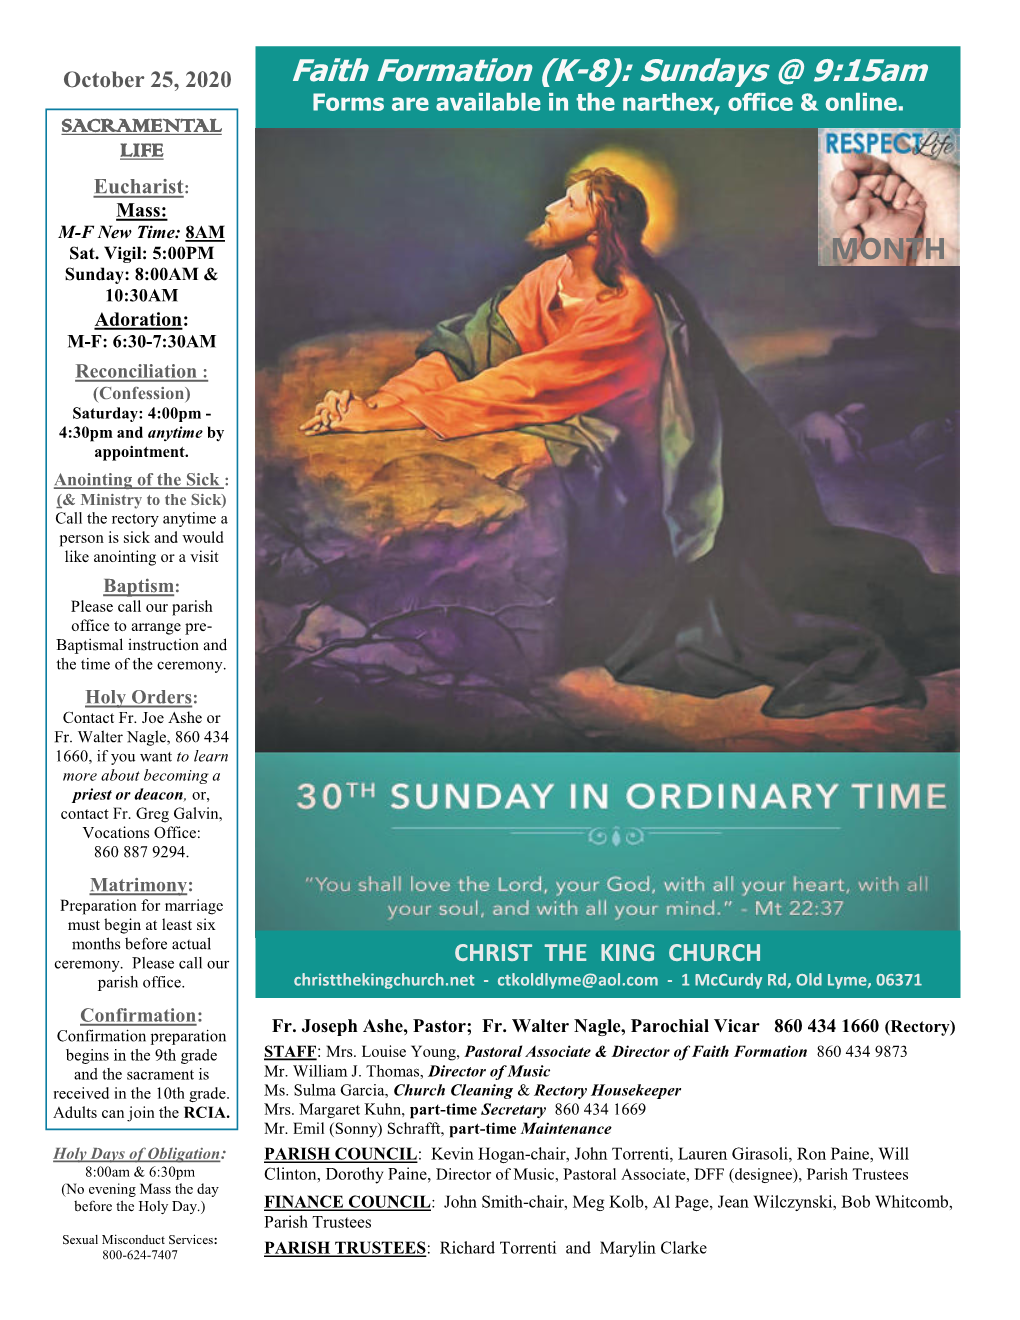 Faith Formation (K-8): Sundays @ 9:15Am Forms Are Available in the Narthex, Office & Online